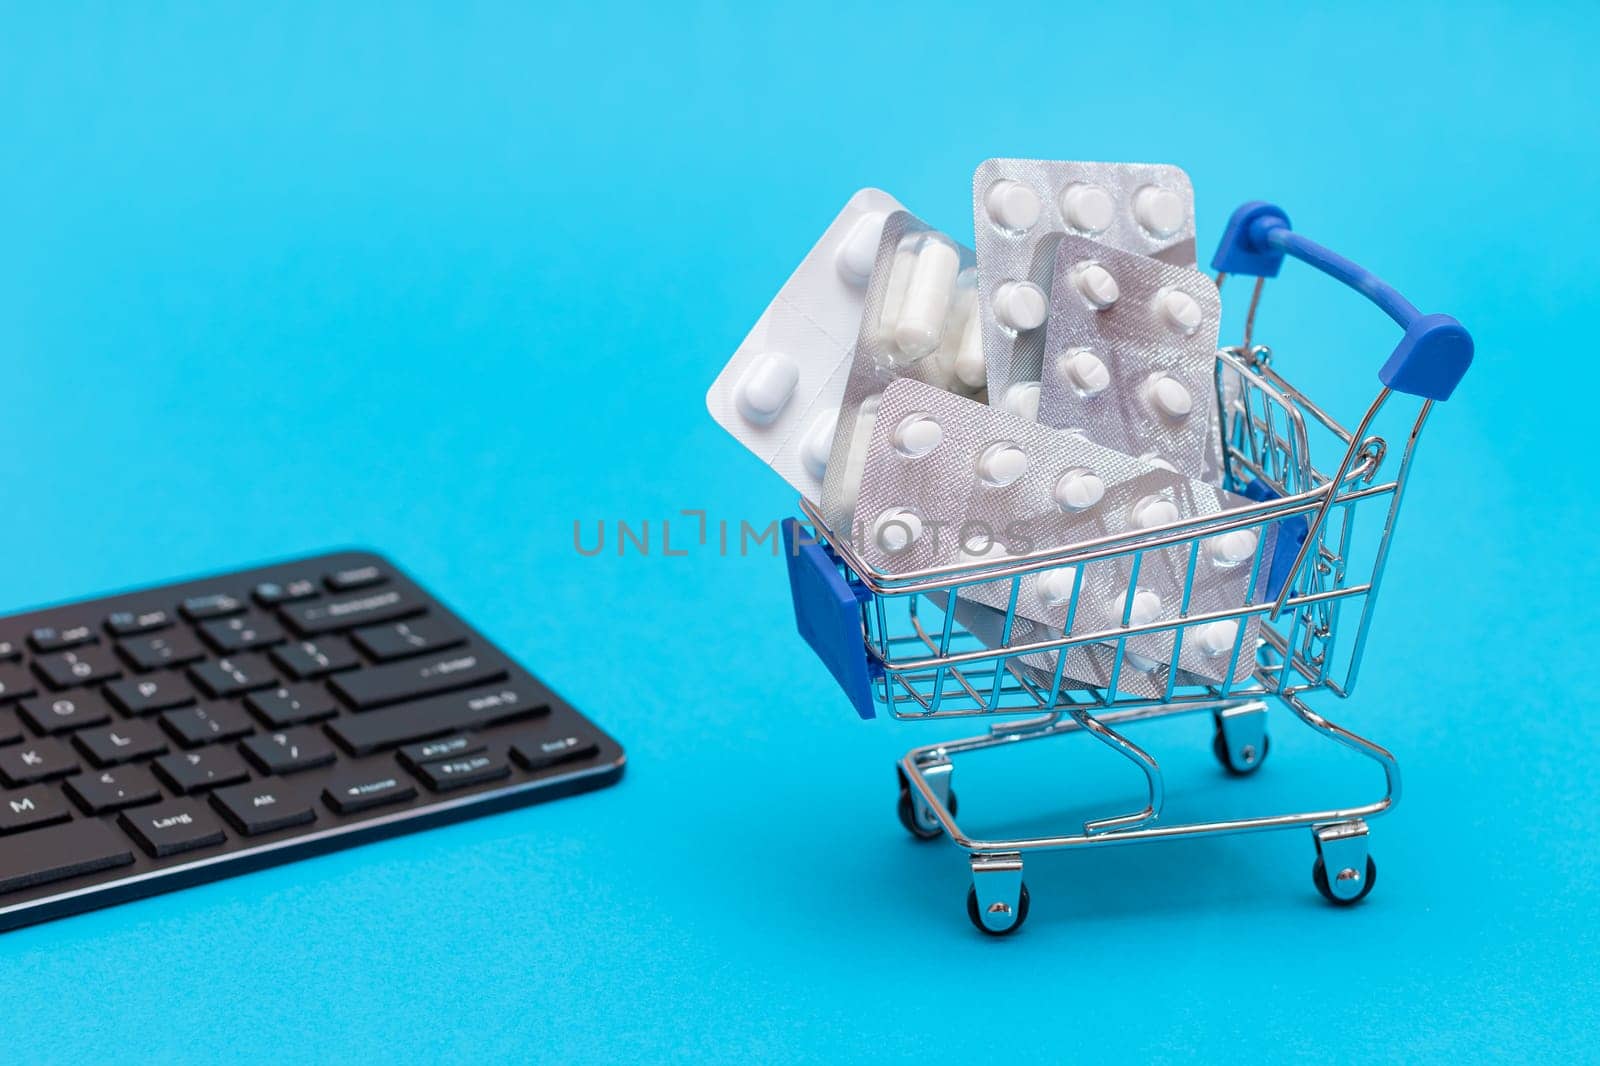 Ordering Medicines. Expensive Medicine and Inflation Concept: Pills and Capsules in a Shopping Cart on Blue Background. Global Pharmaceutical Industry and Big Pharma. Trade in Medicines